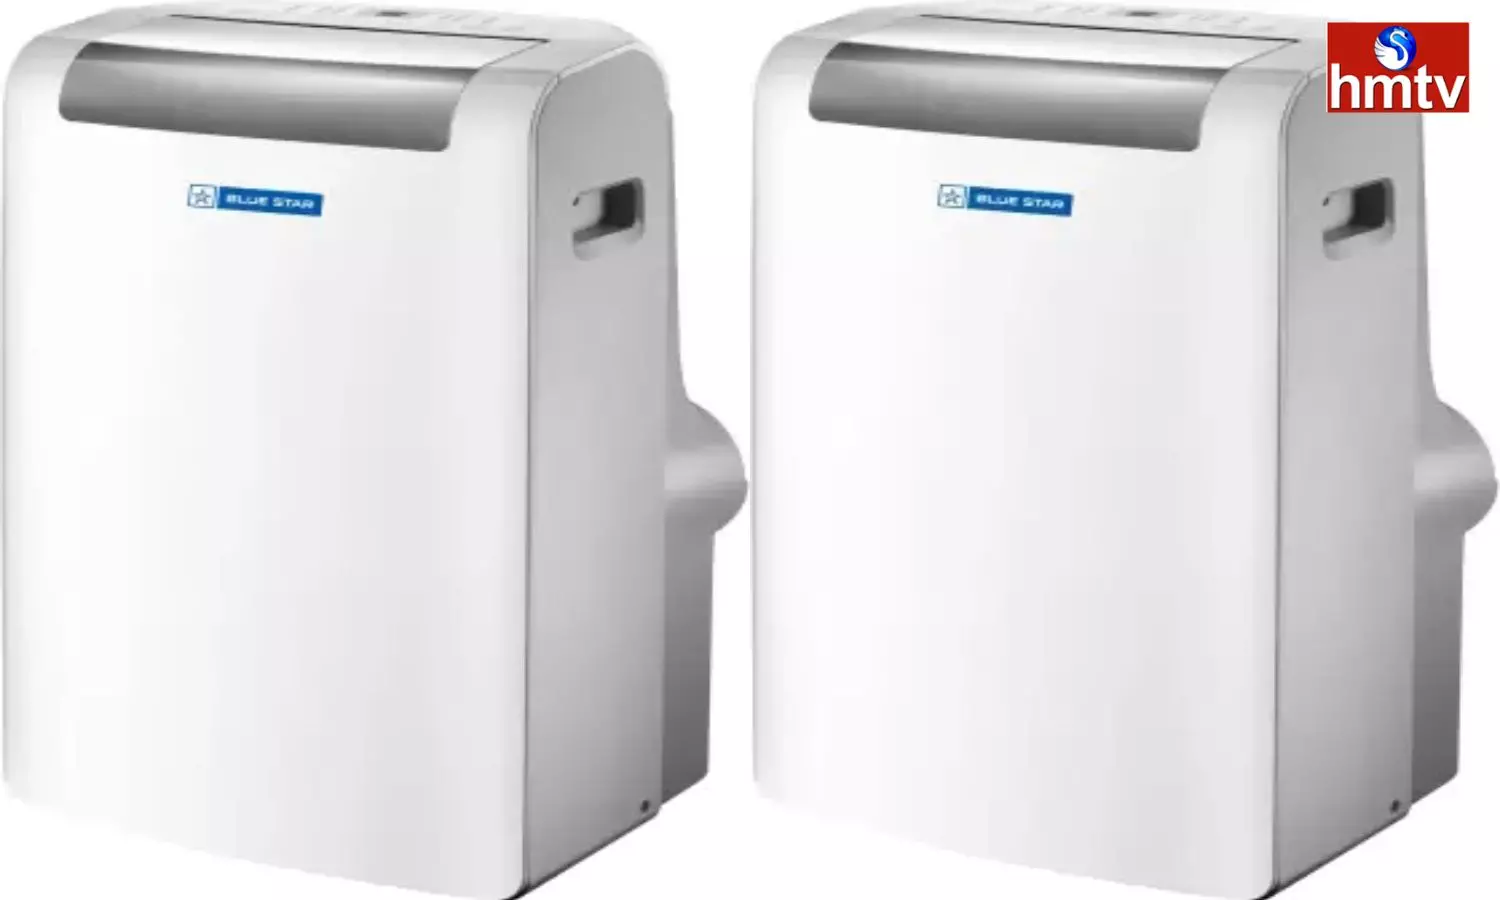 Check Portable 1 Ton Air Conditioner Specifications Price and Features